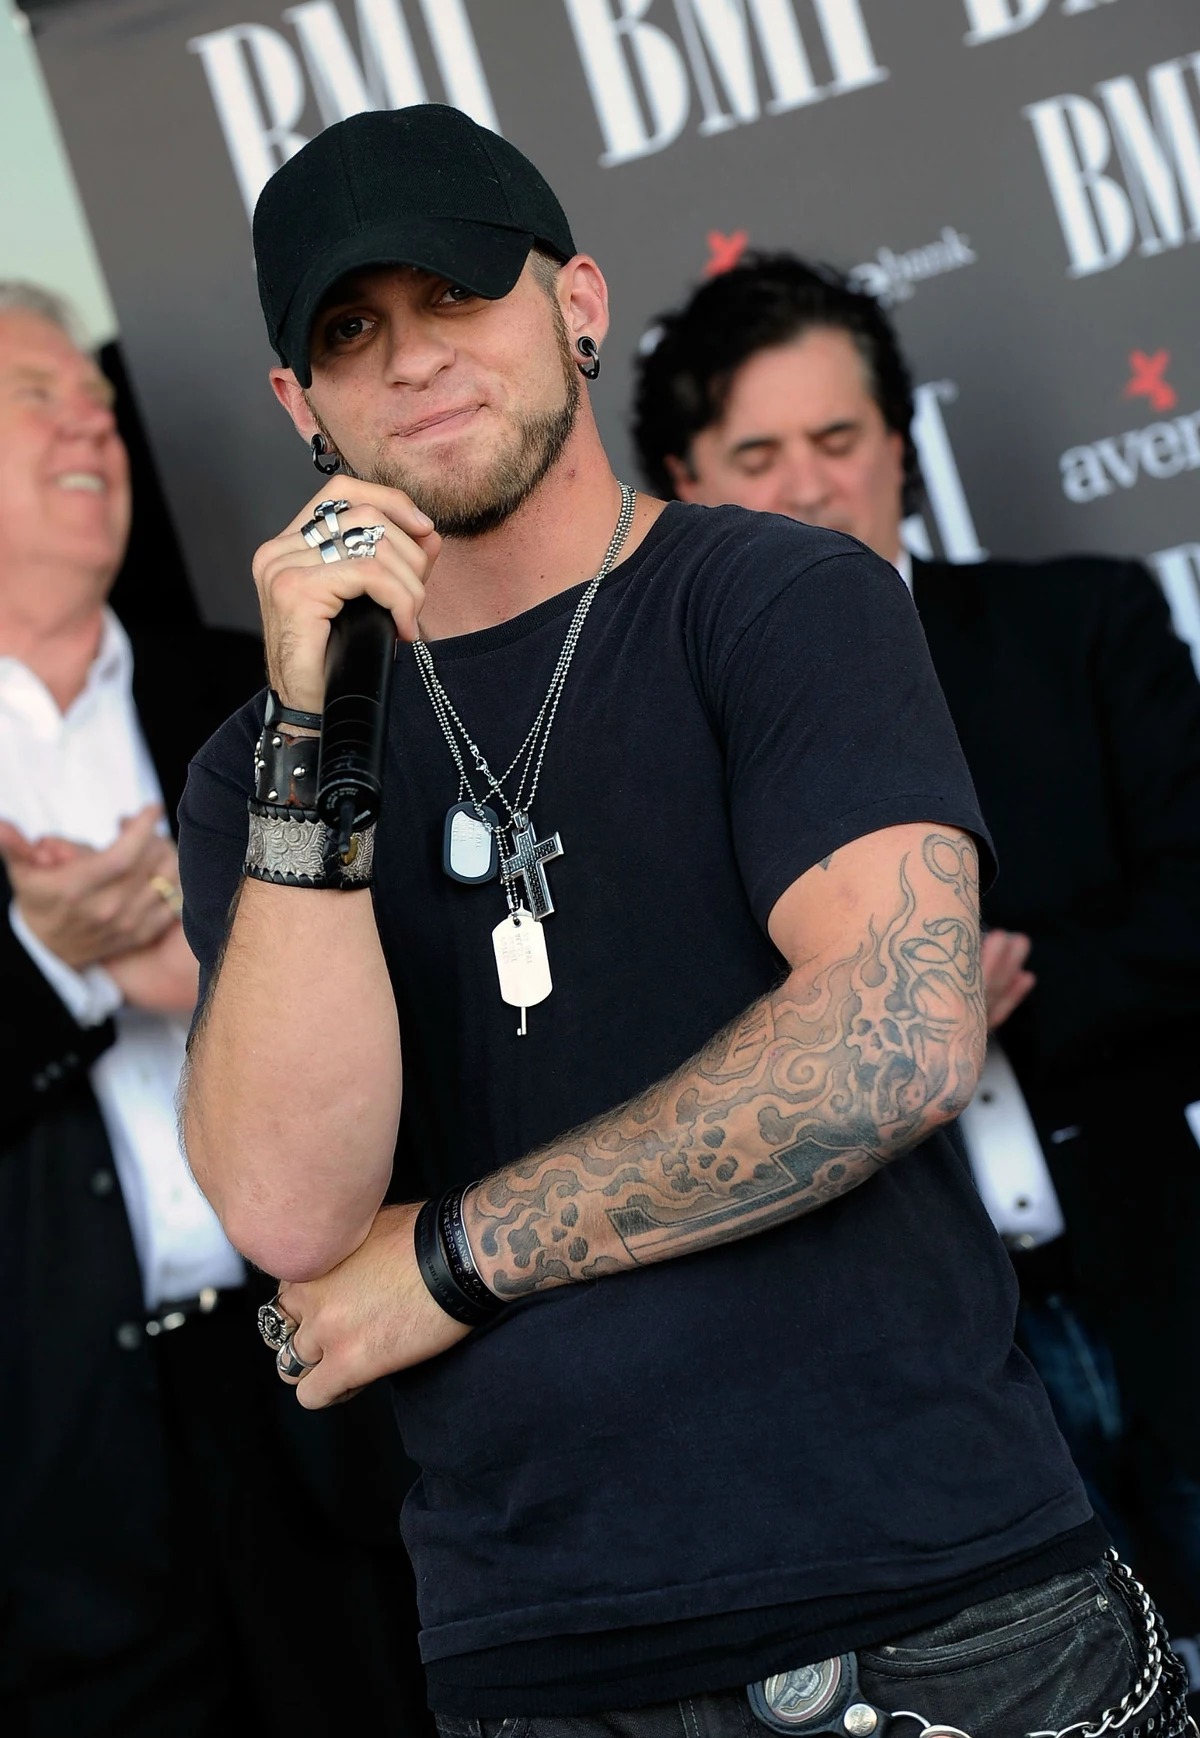 Here's How To See Brantley Gilbert on the Beach For $20